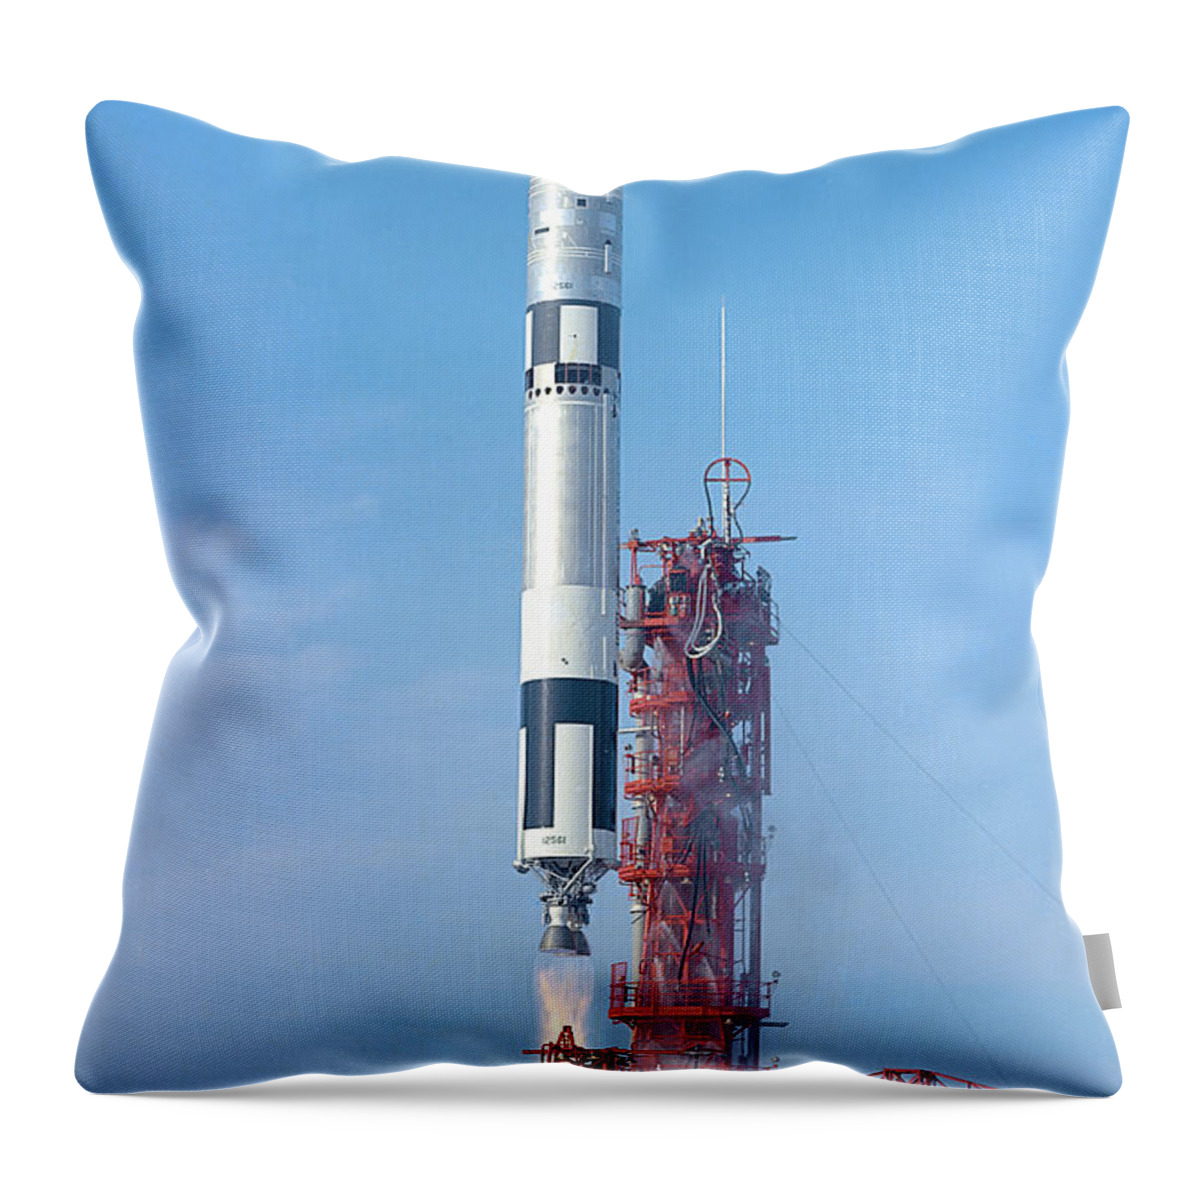 1965 Throw Pillow featuring the photograph Gemini Vi Lifts Off From Its Launch Pad by Stocktrek Images